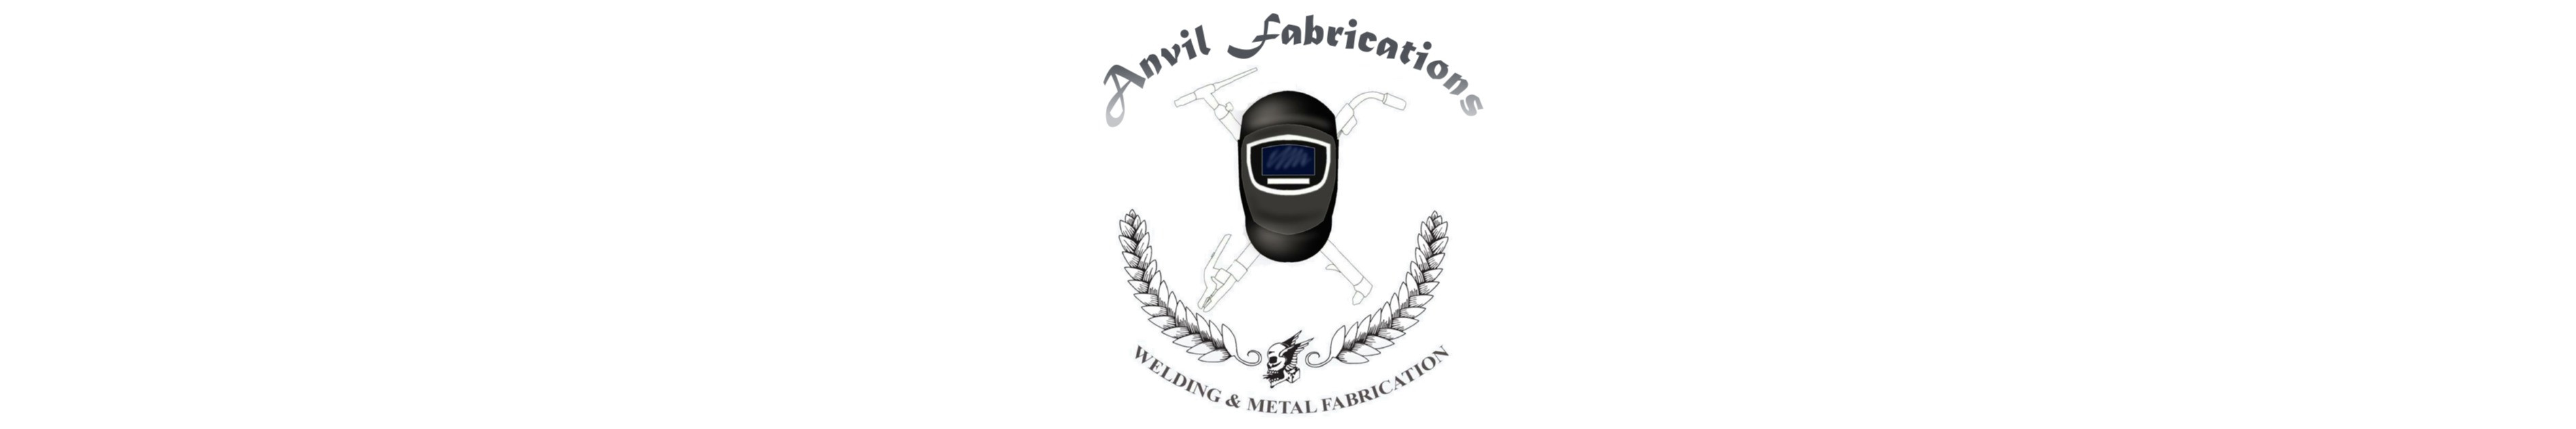 Welding & Metal Fabrication Services